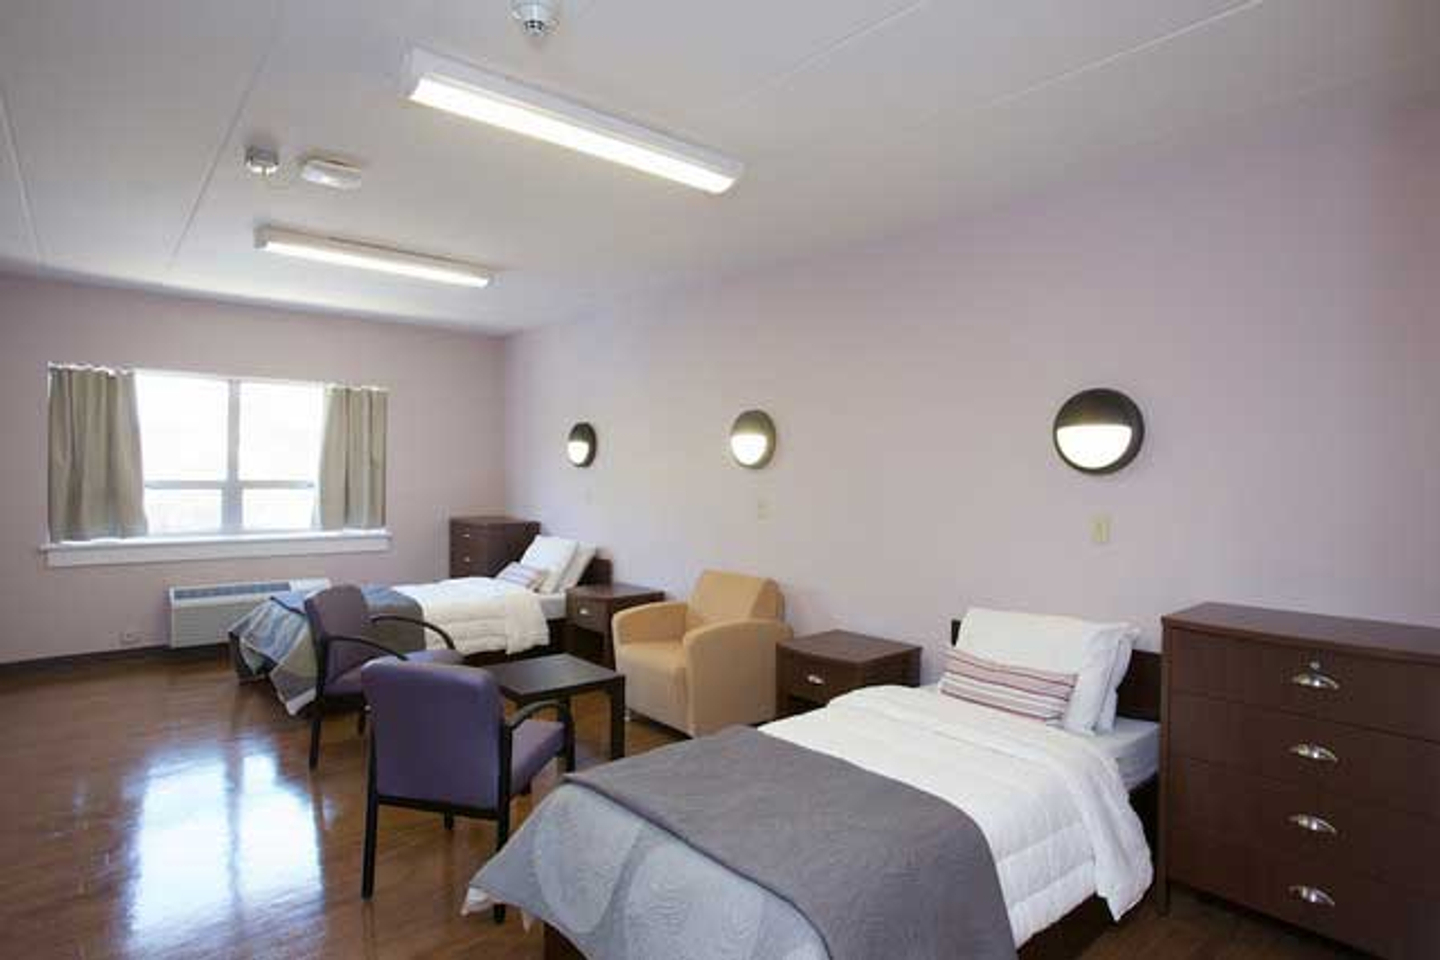 A patient room at Reflections Eating Disorder Treatment Center with two beds, two nightstands, two dressers, and three chairs.